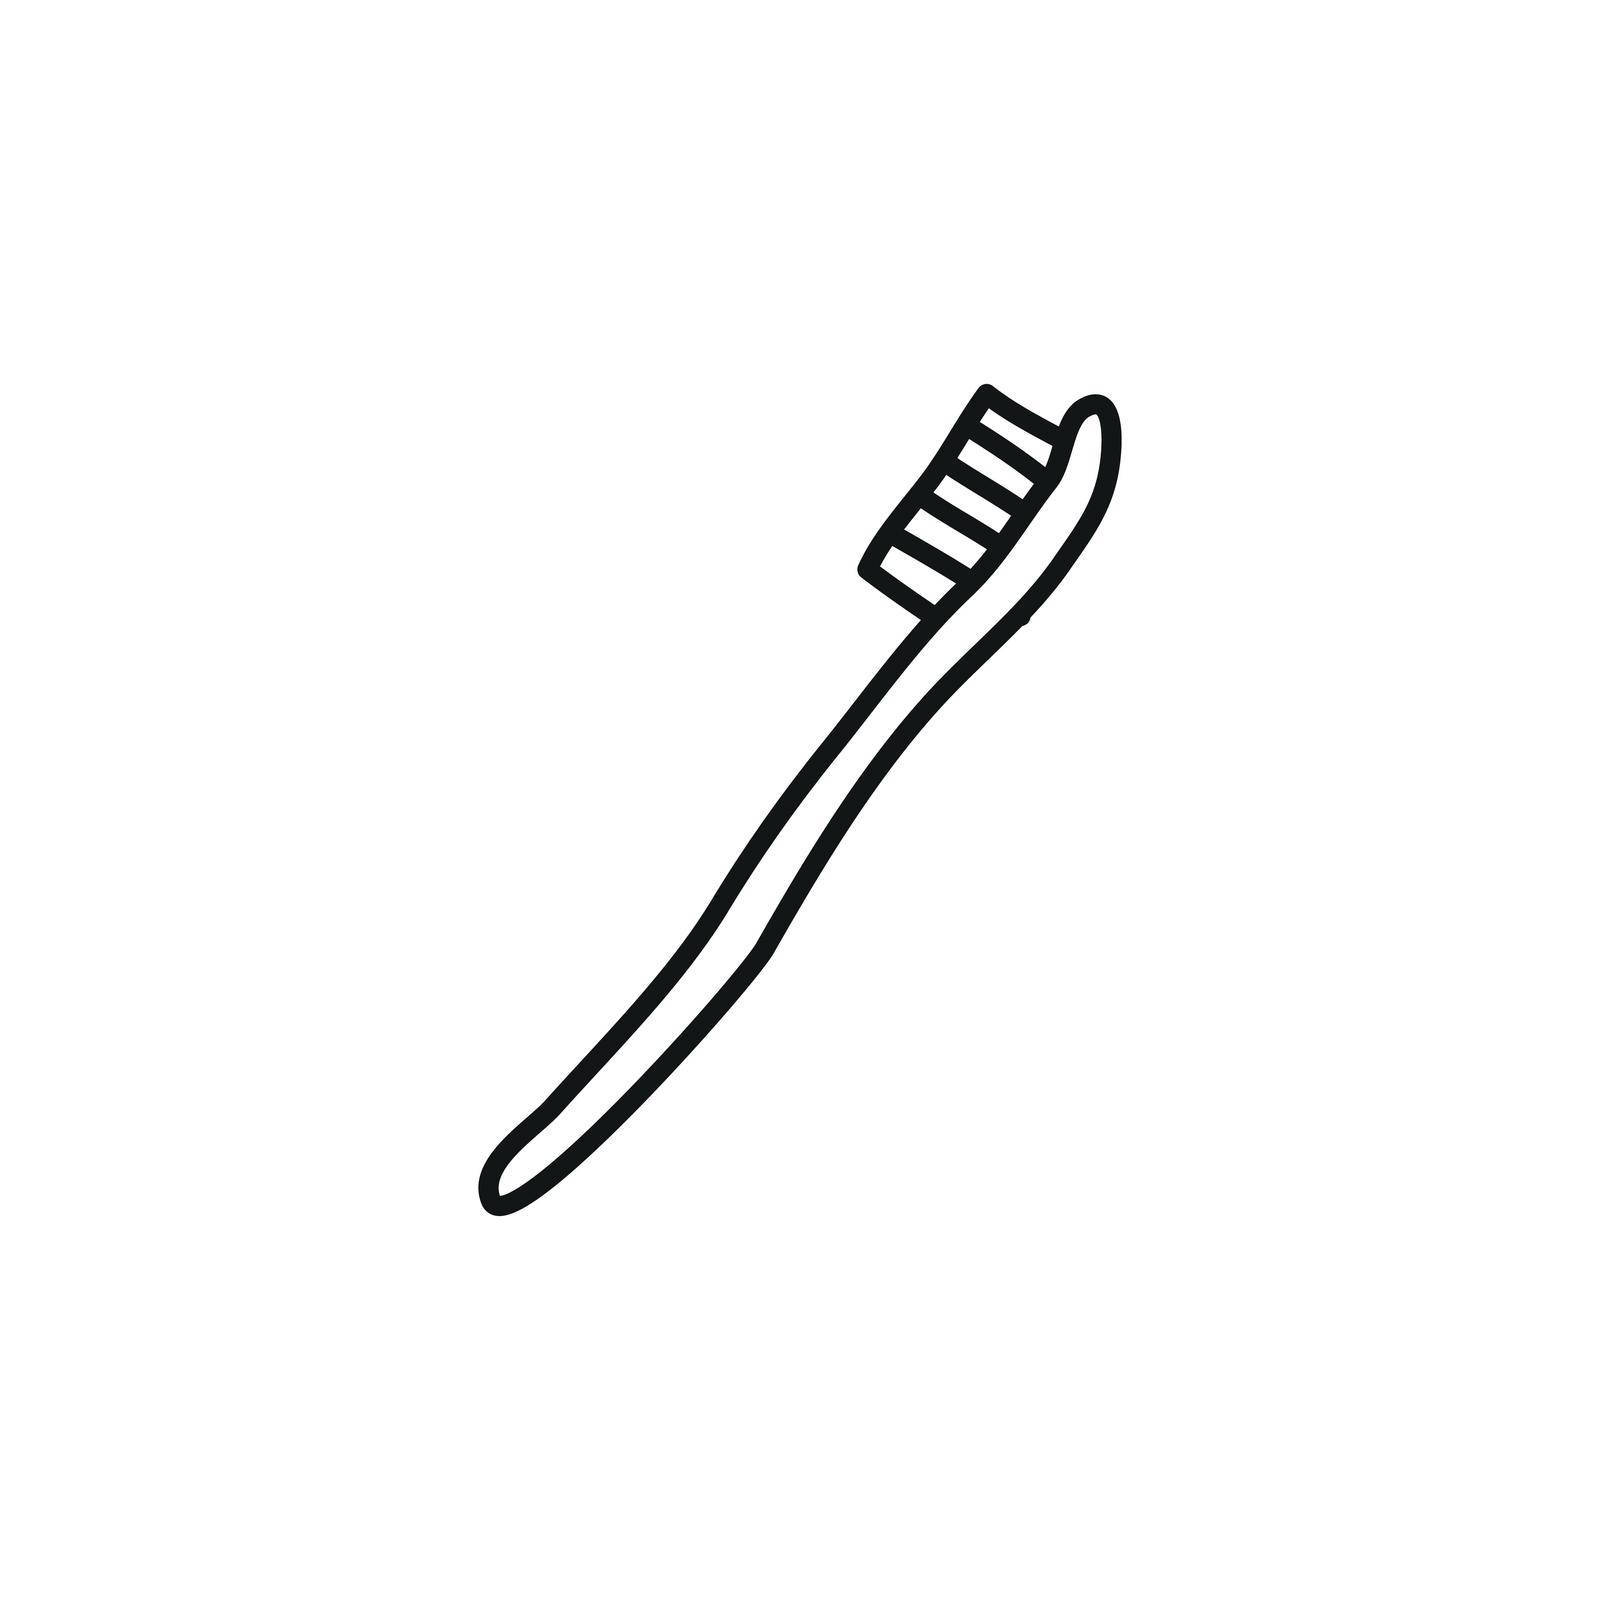 Doodle outline toothbrush. by Minur